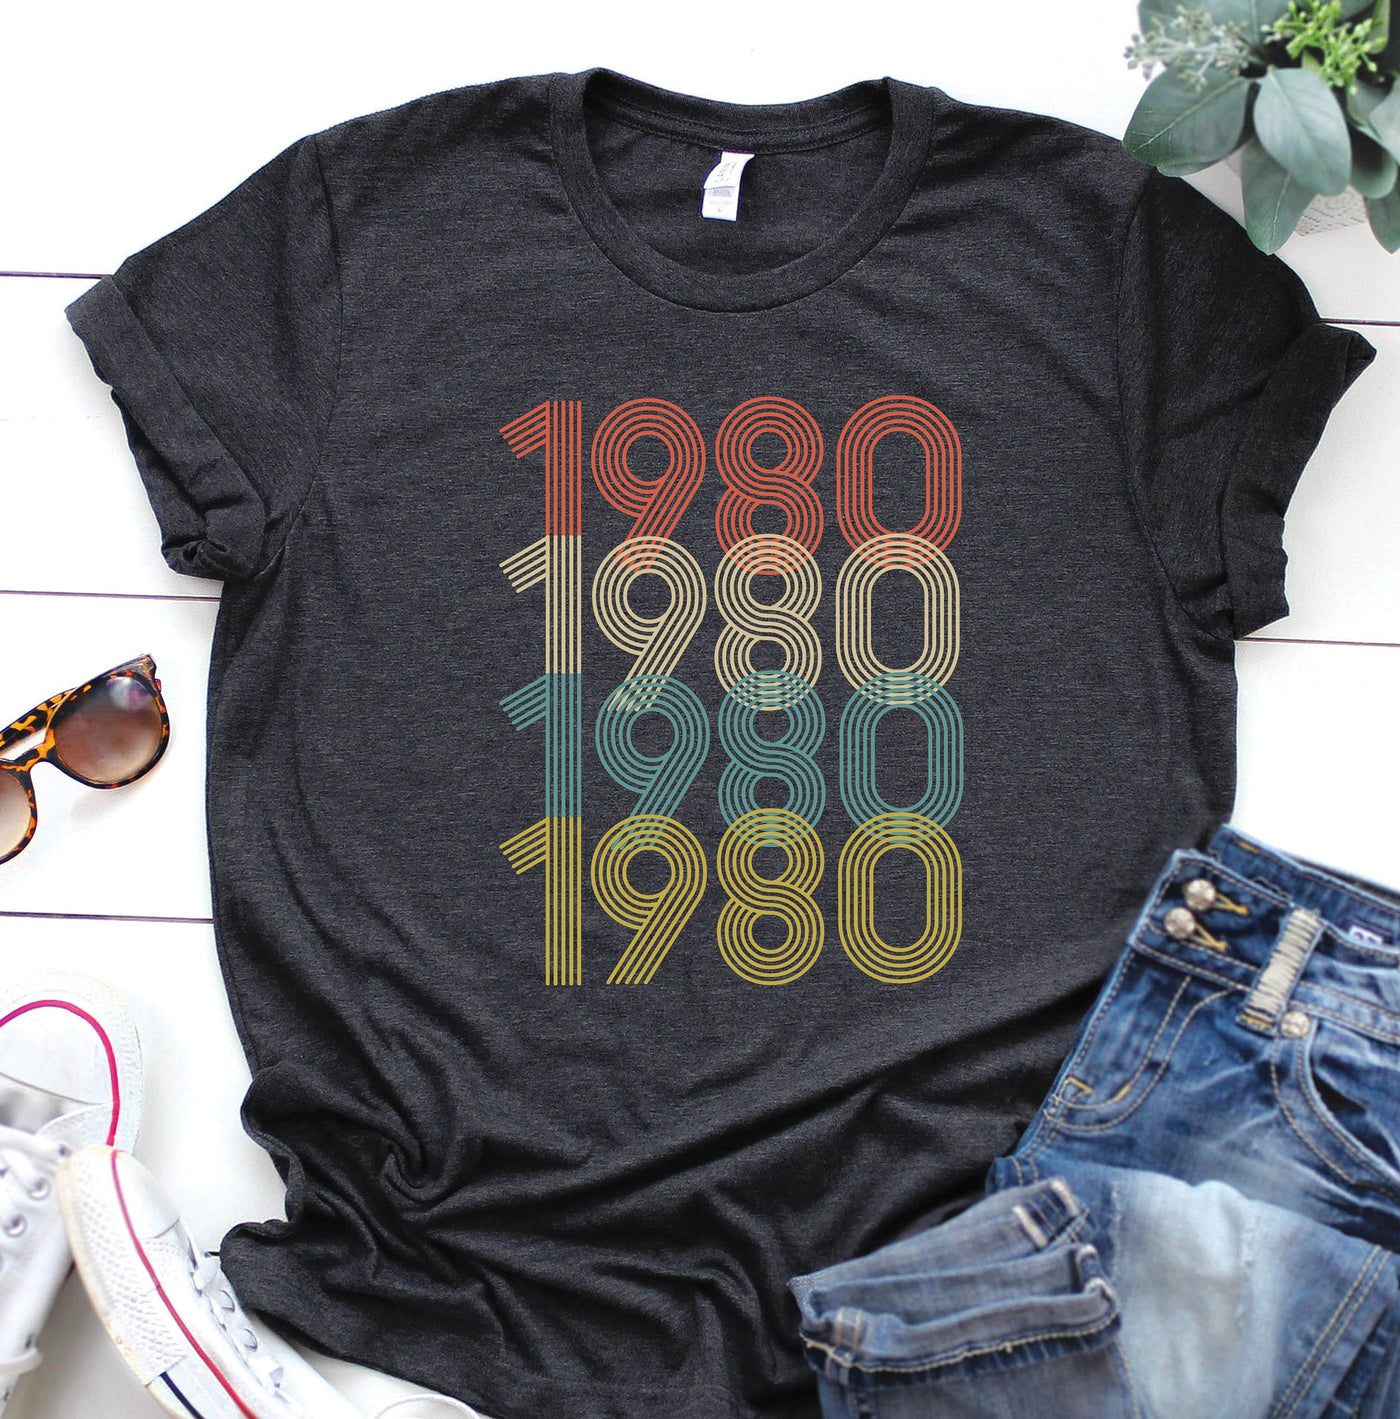 Vintage 1980 Shirt, 43rd Birthday, gift for her